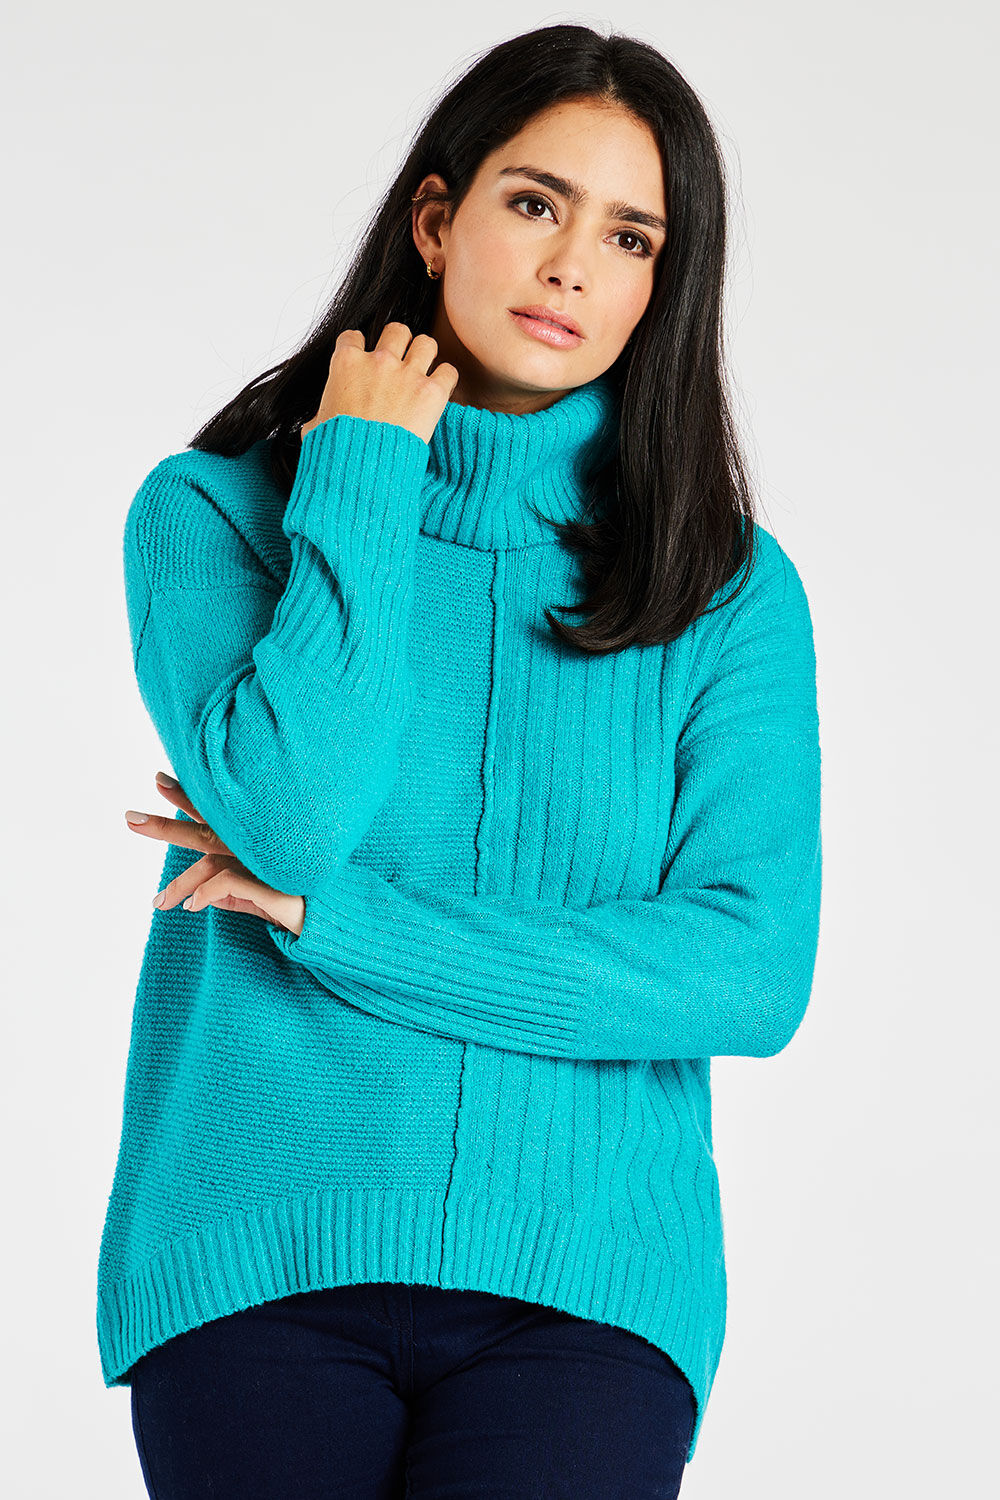 Bonmarche Jade Roll Neck Jumper With Rib Detail, Size: 14